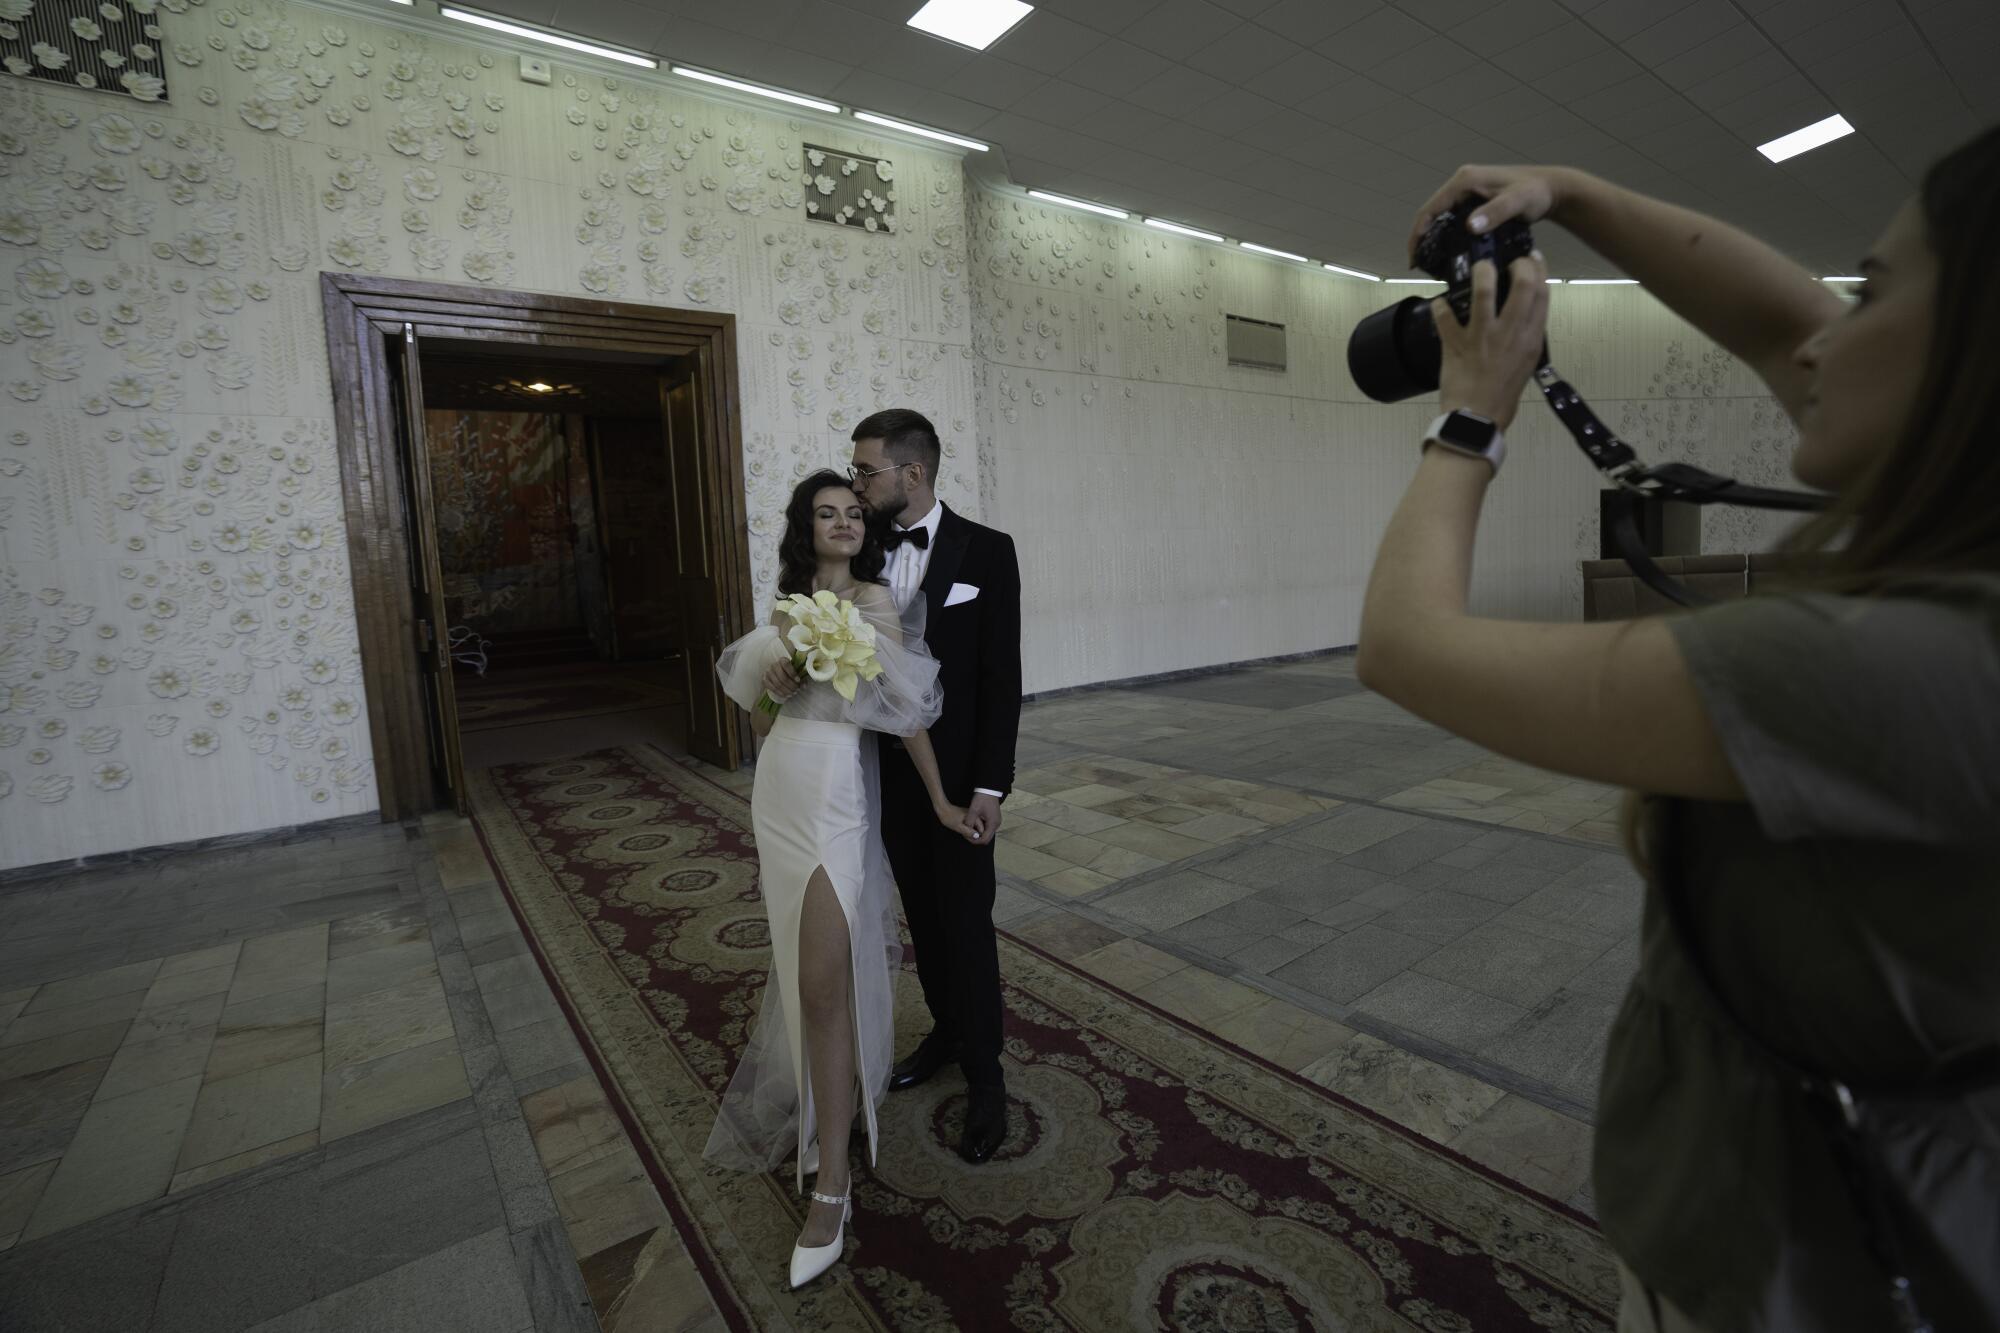 A couple is photographed after their wedding